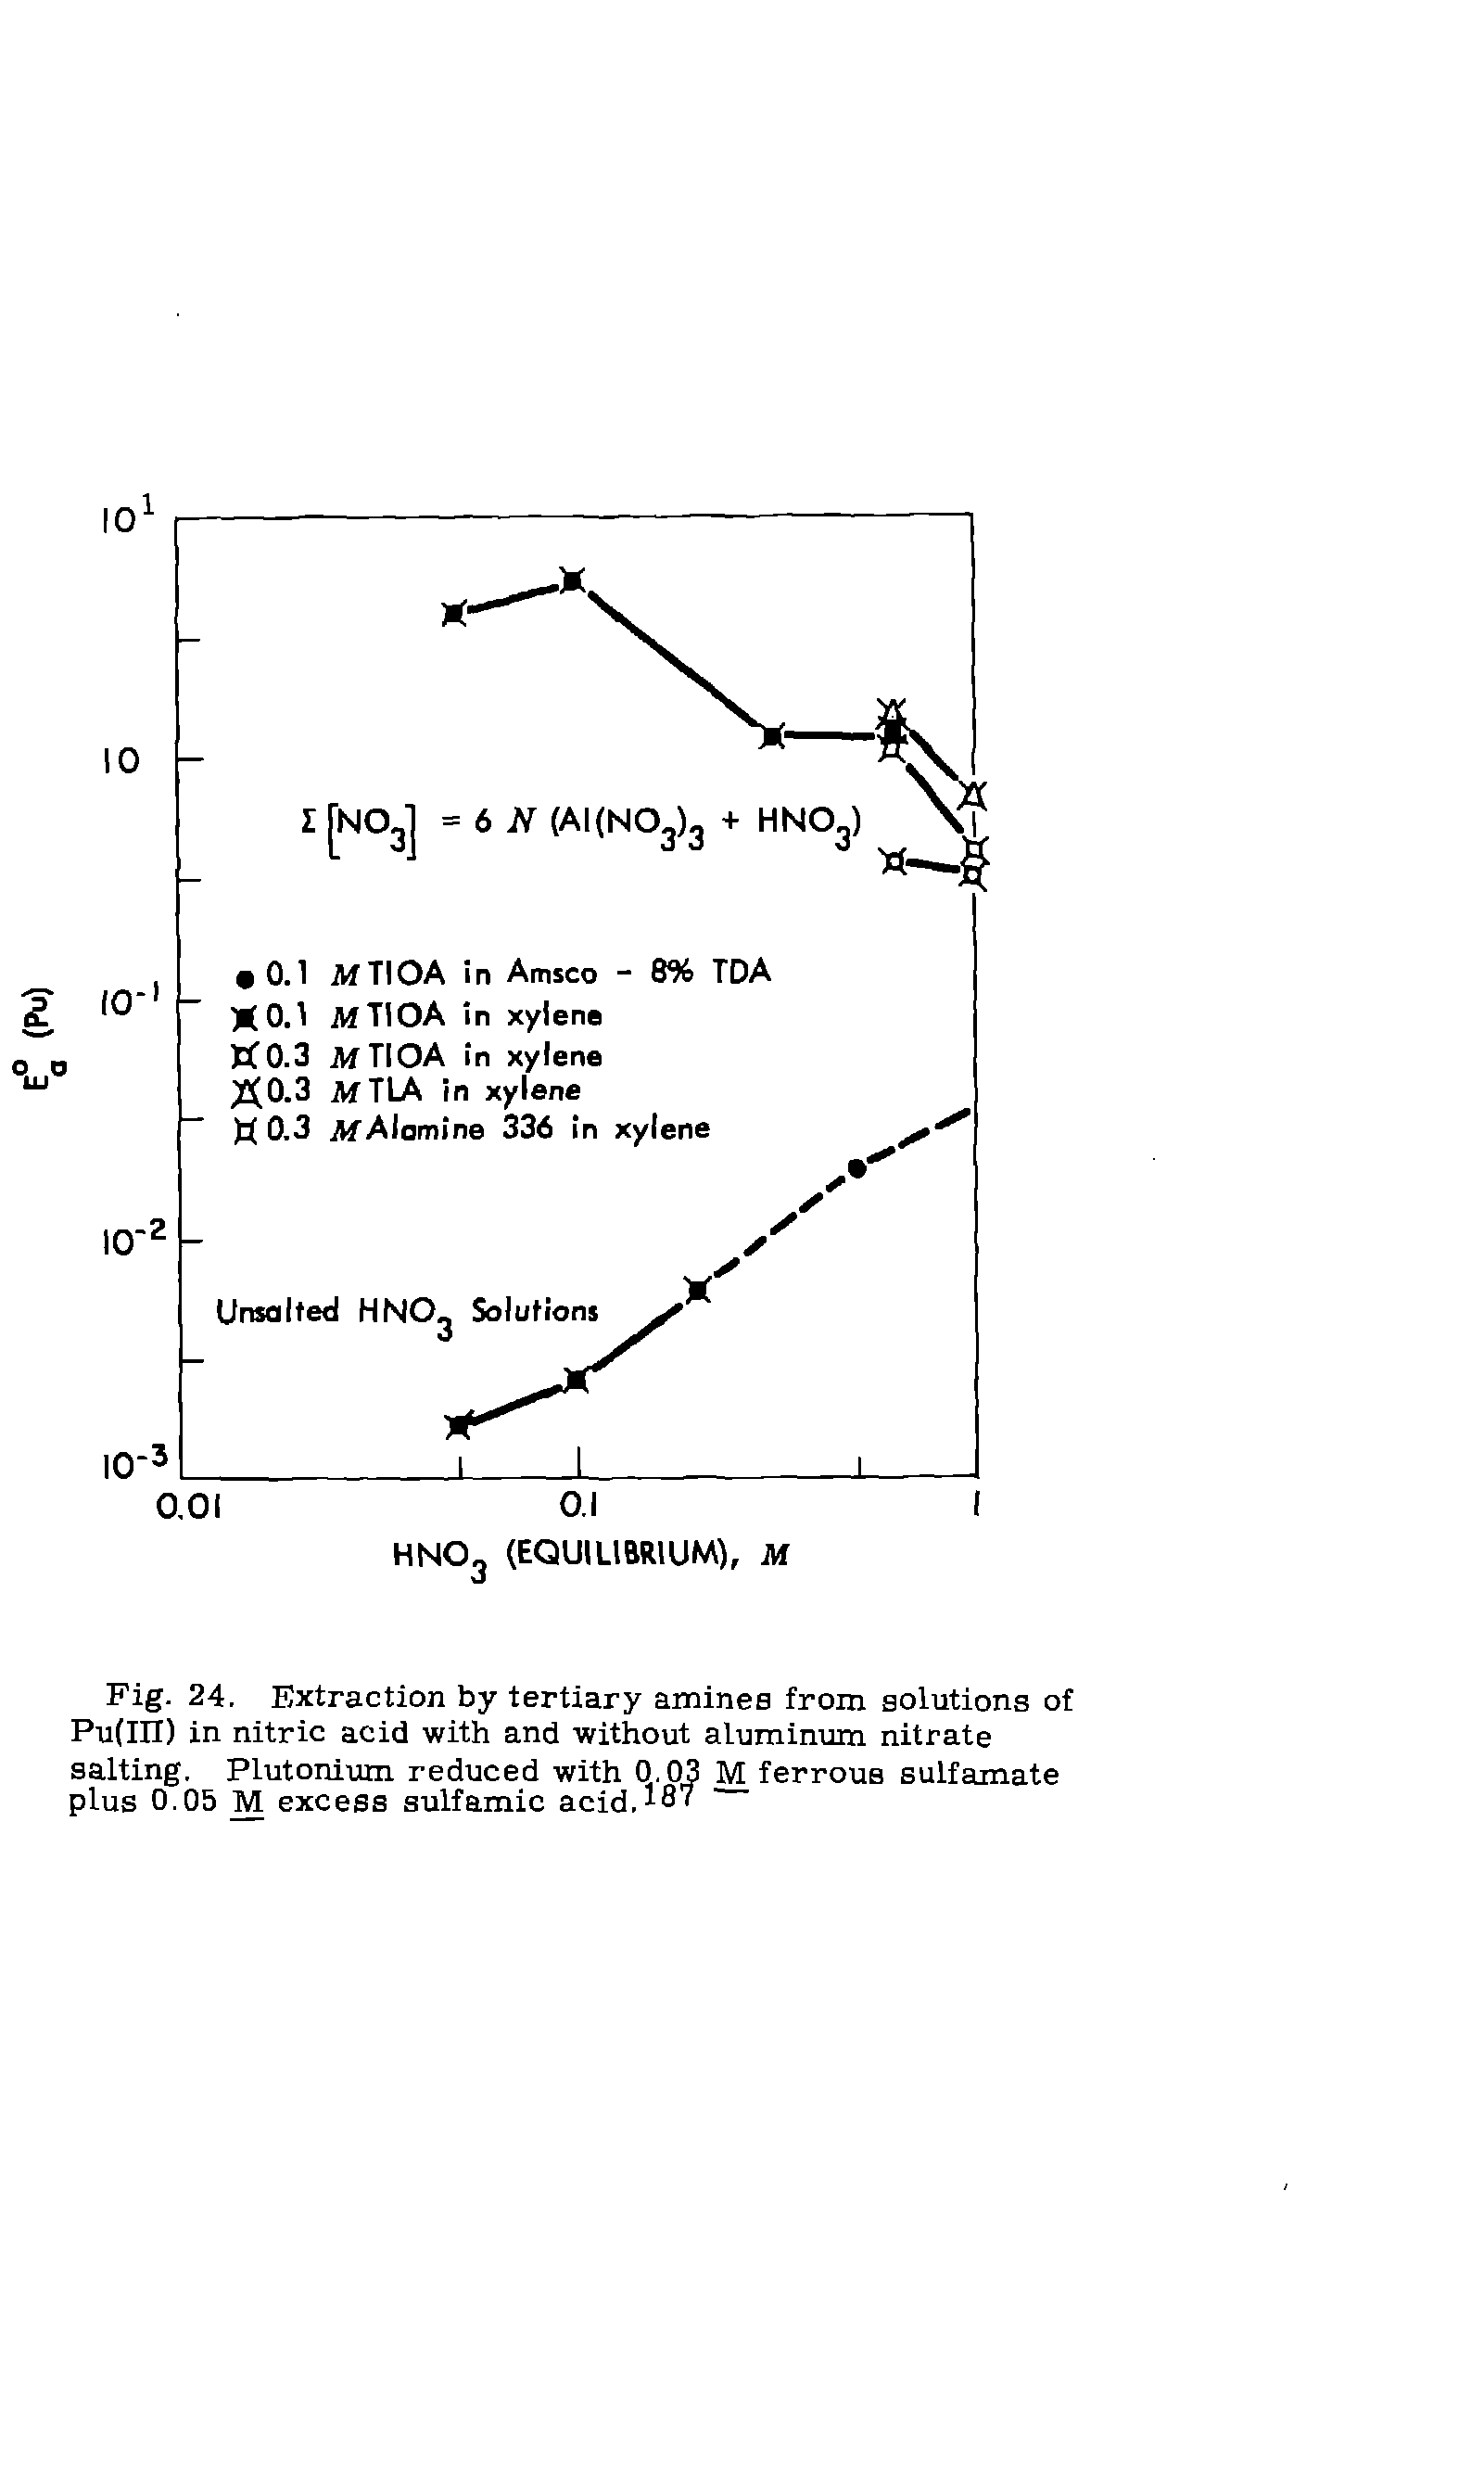 Fig. 24. Extraction by tertiary amines from solutions of Pu(in) in nitric acid with and without aluminum nitrate salting. Plutonium reduced with 0.03 M ferrous sulfamate plus 0.05 M excess sulfamic acid, 187...